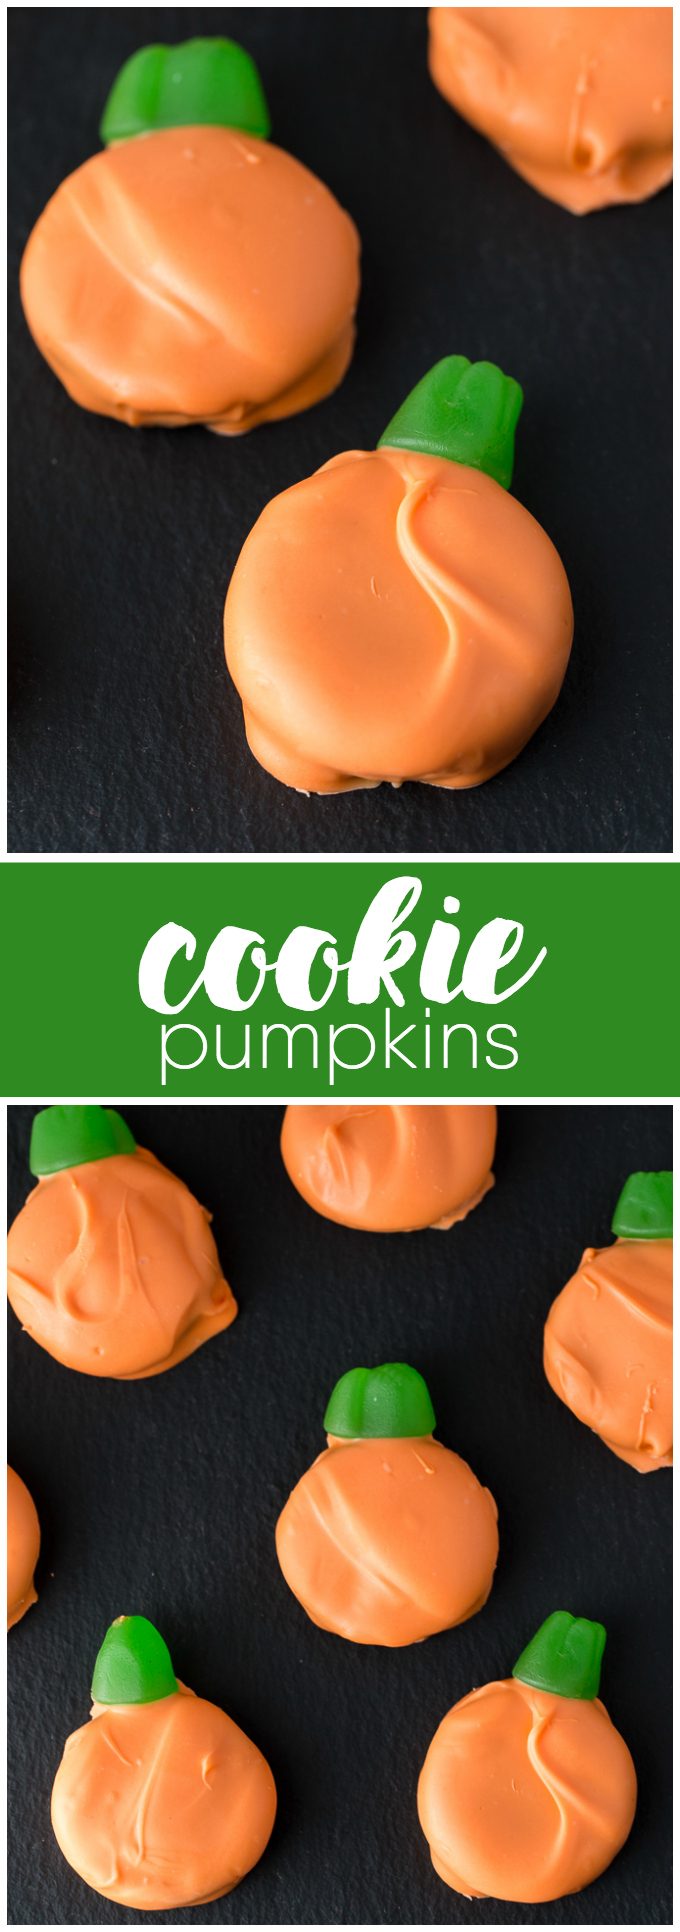 Cookie Pumpkins - Kid-friendly recipe! Let the family help with this Oreo-based Halloween dessert.